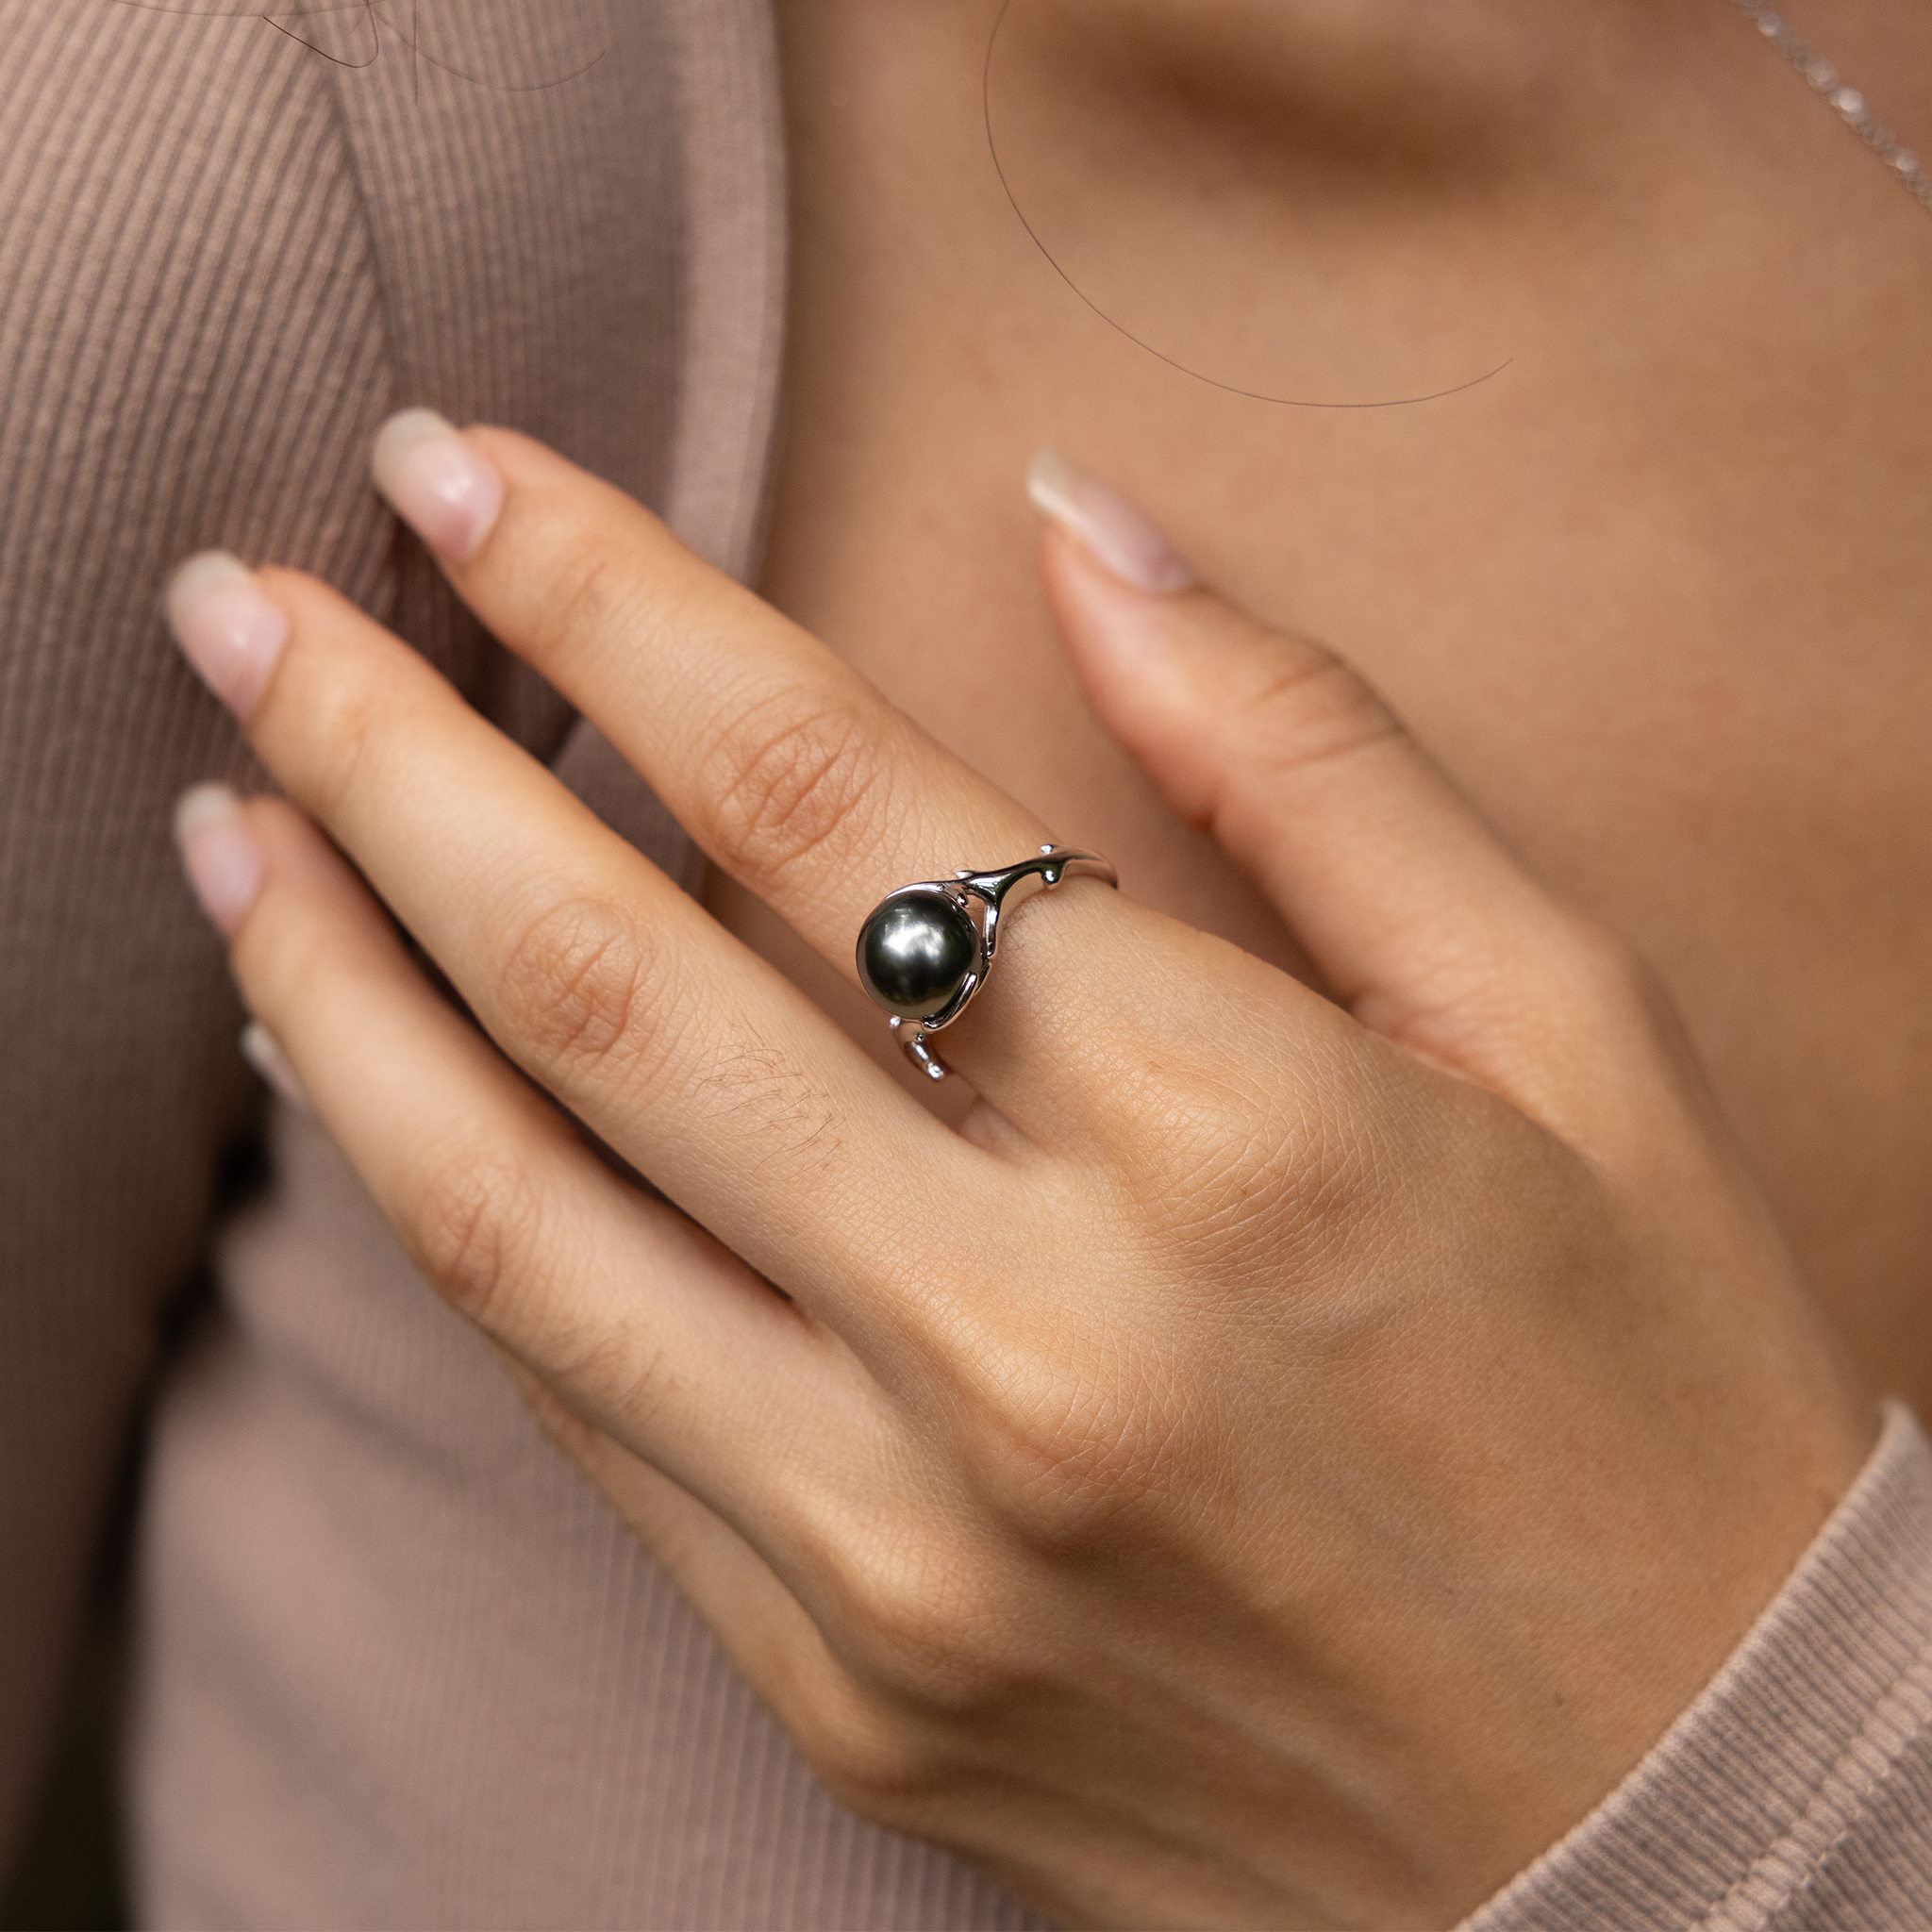 Heritage Tahitian Black Pearl Ring in White Gold - 9-10mm